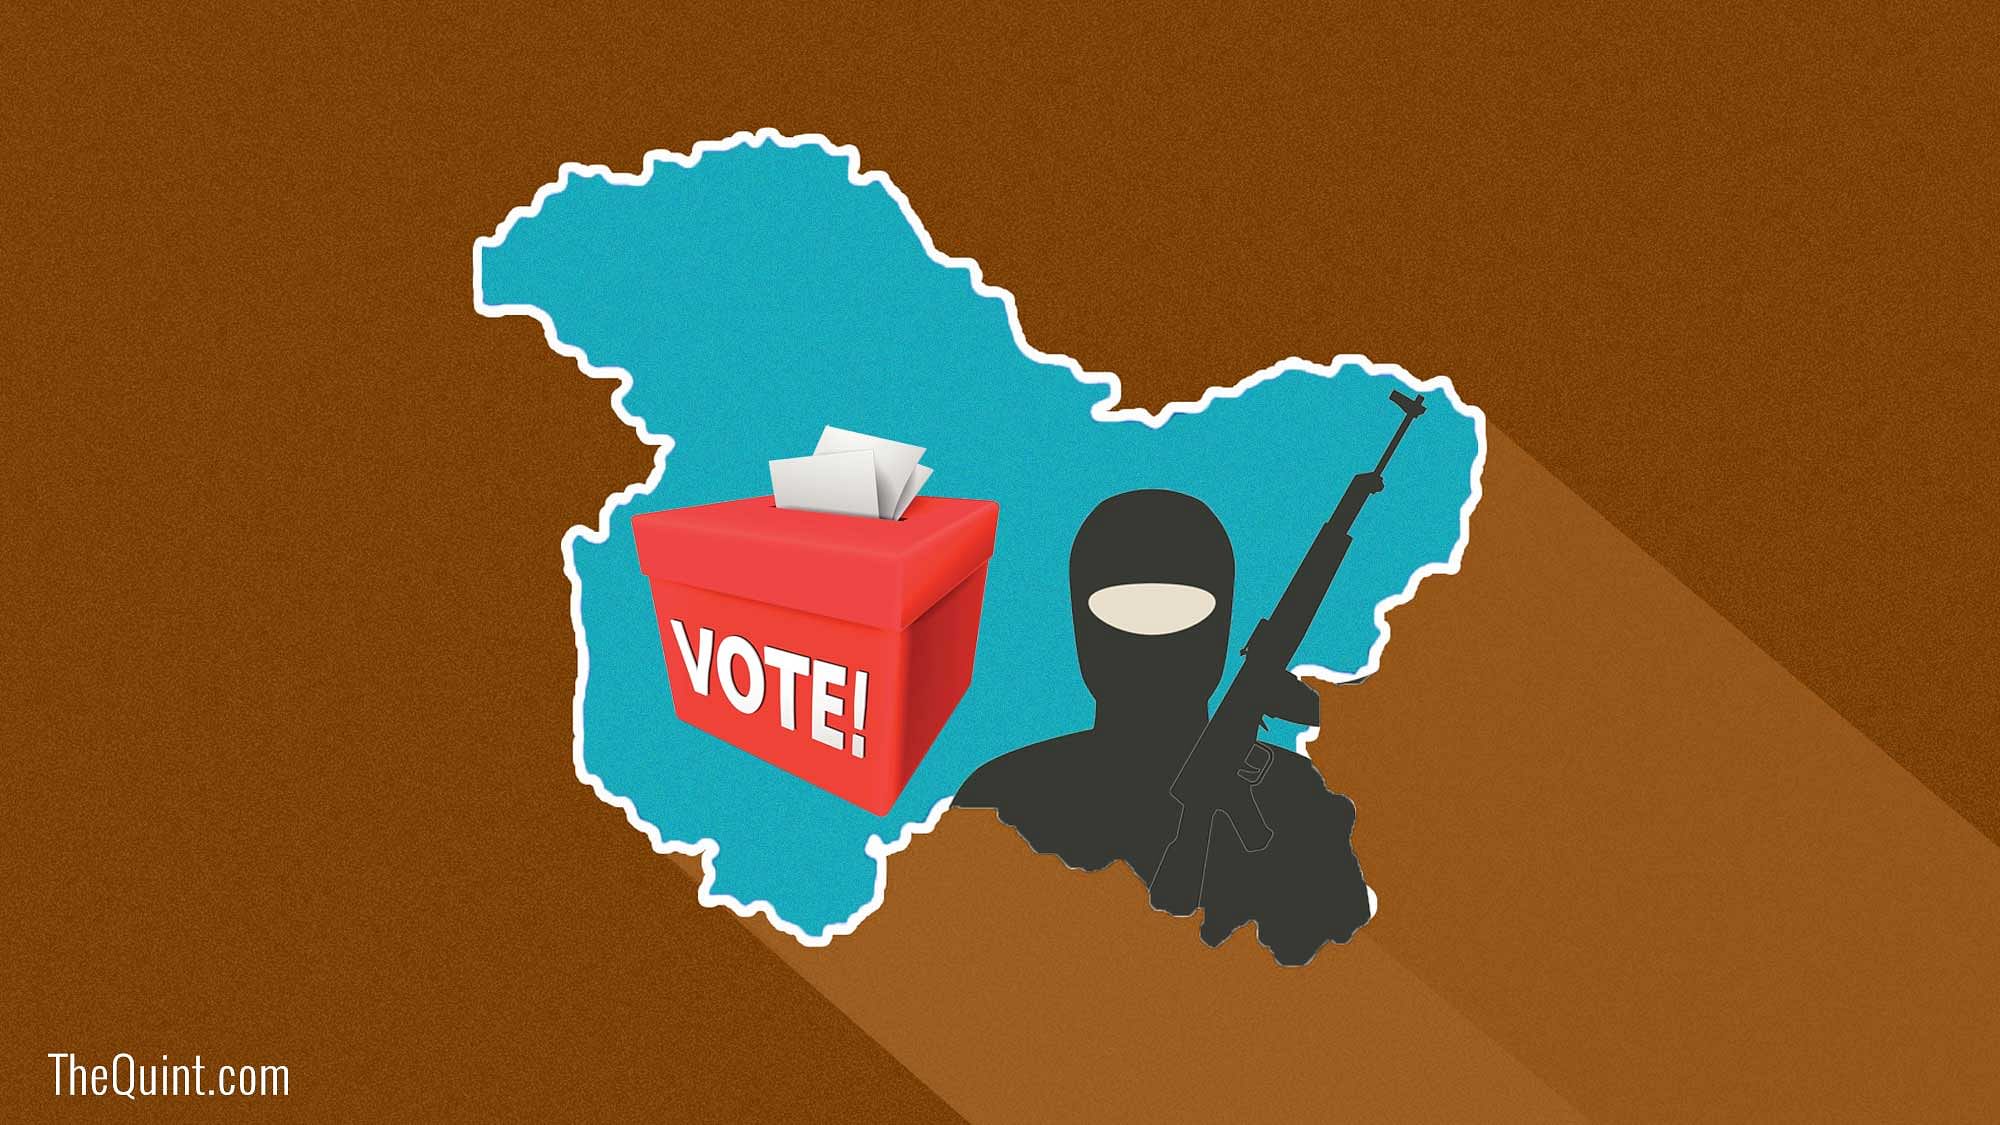 Following Hizbul’s acid threat ahead of panchayat elections, politicians in J&amp;K choose to play it safely.